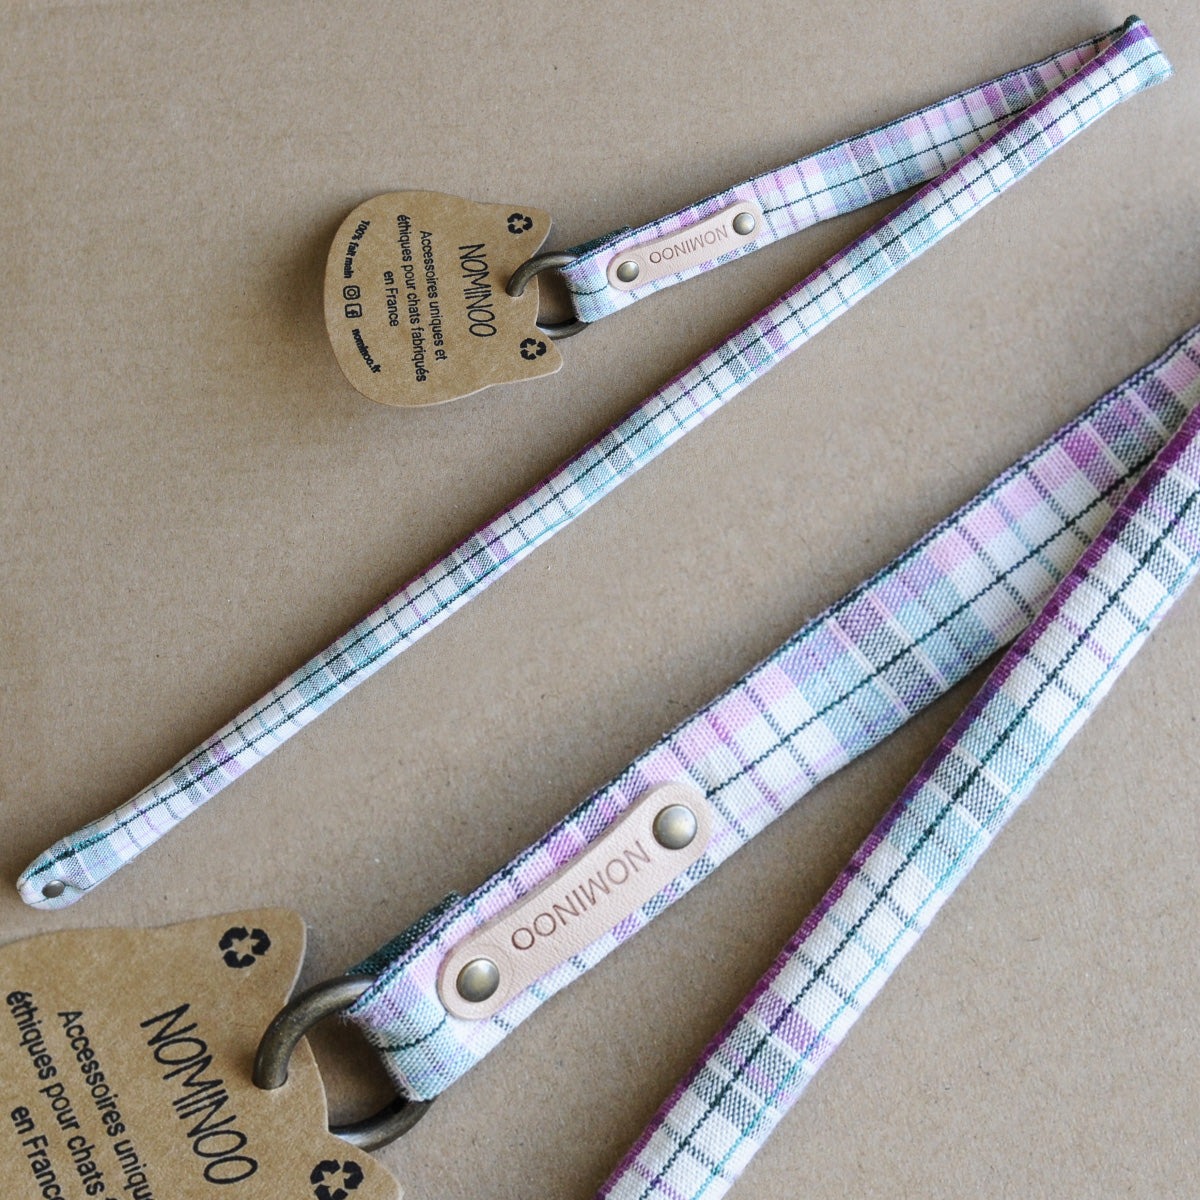 Nominoo Cat Wand Toy, Wood Stick Wrapped In Gingham Fabric | at Made Moggie